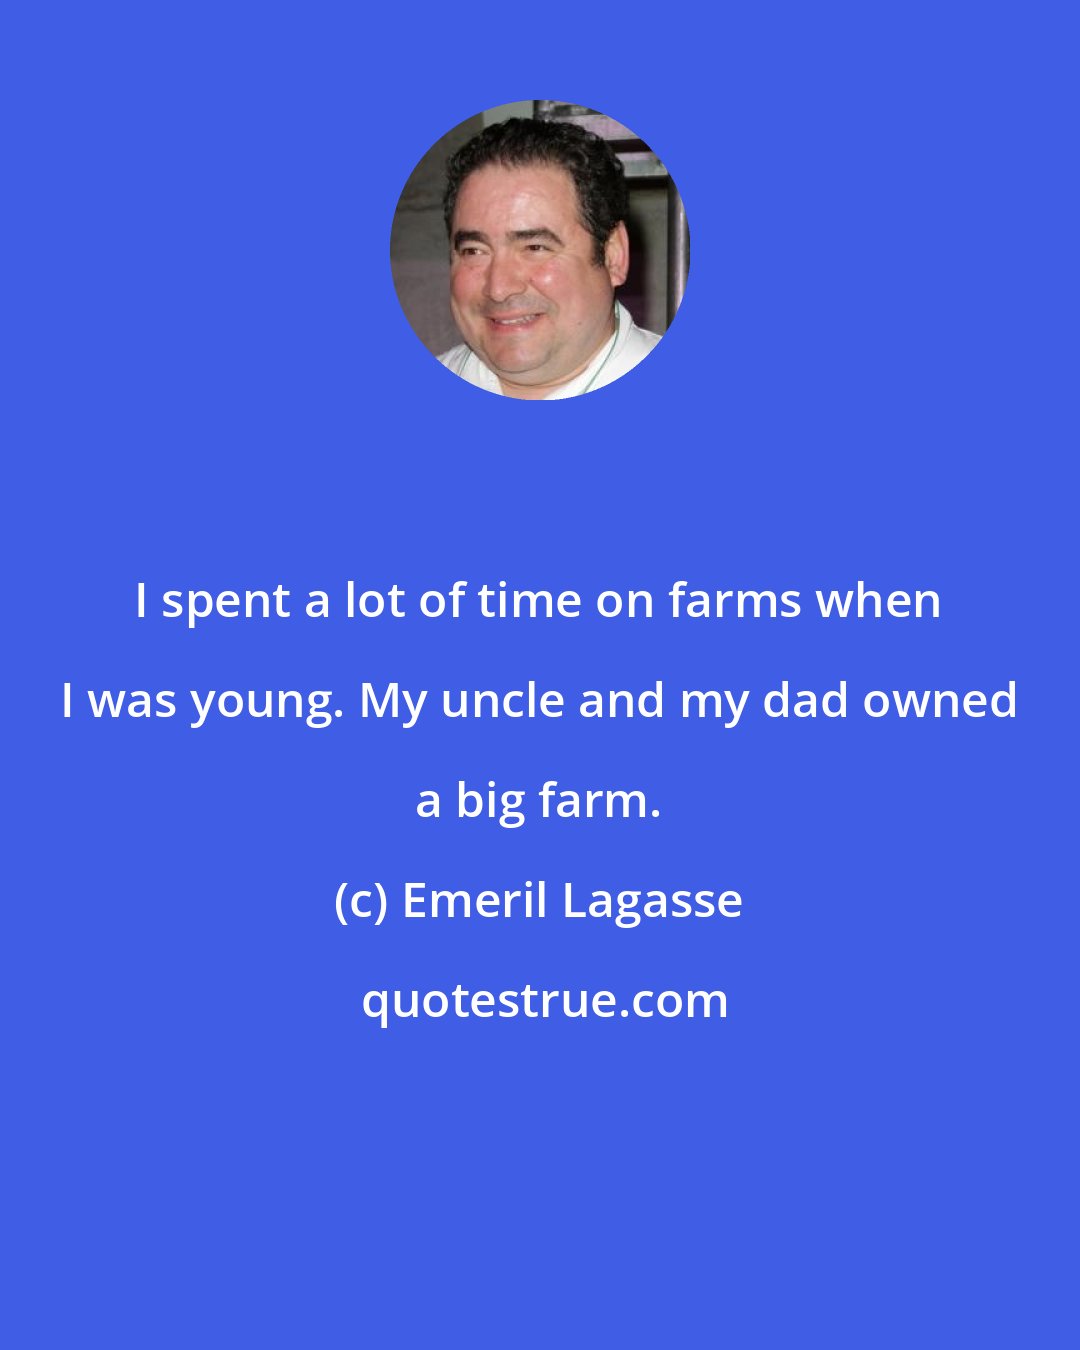 Emeril Lagasse: I spent a lot of time on farms when I was young. My uncle and my dad owned a big farm.